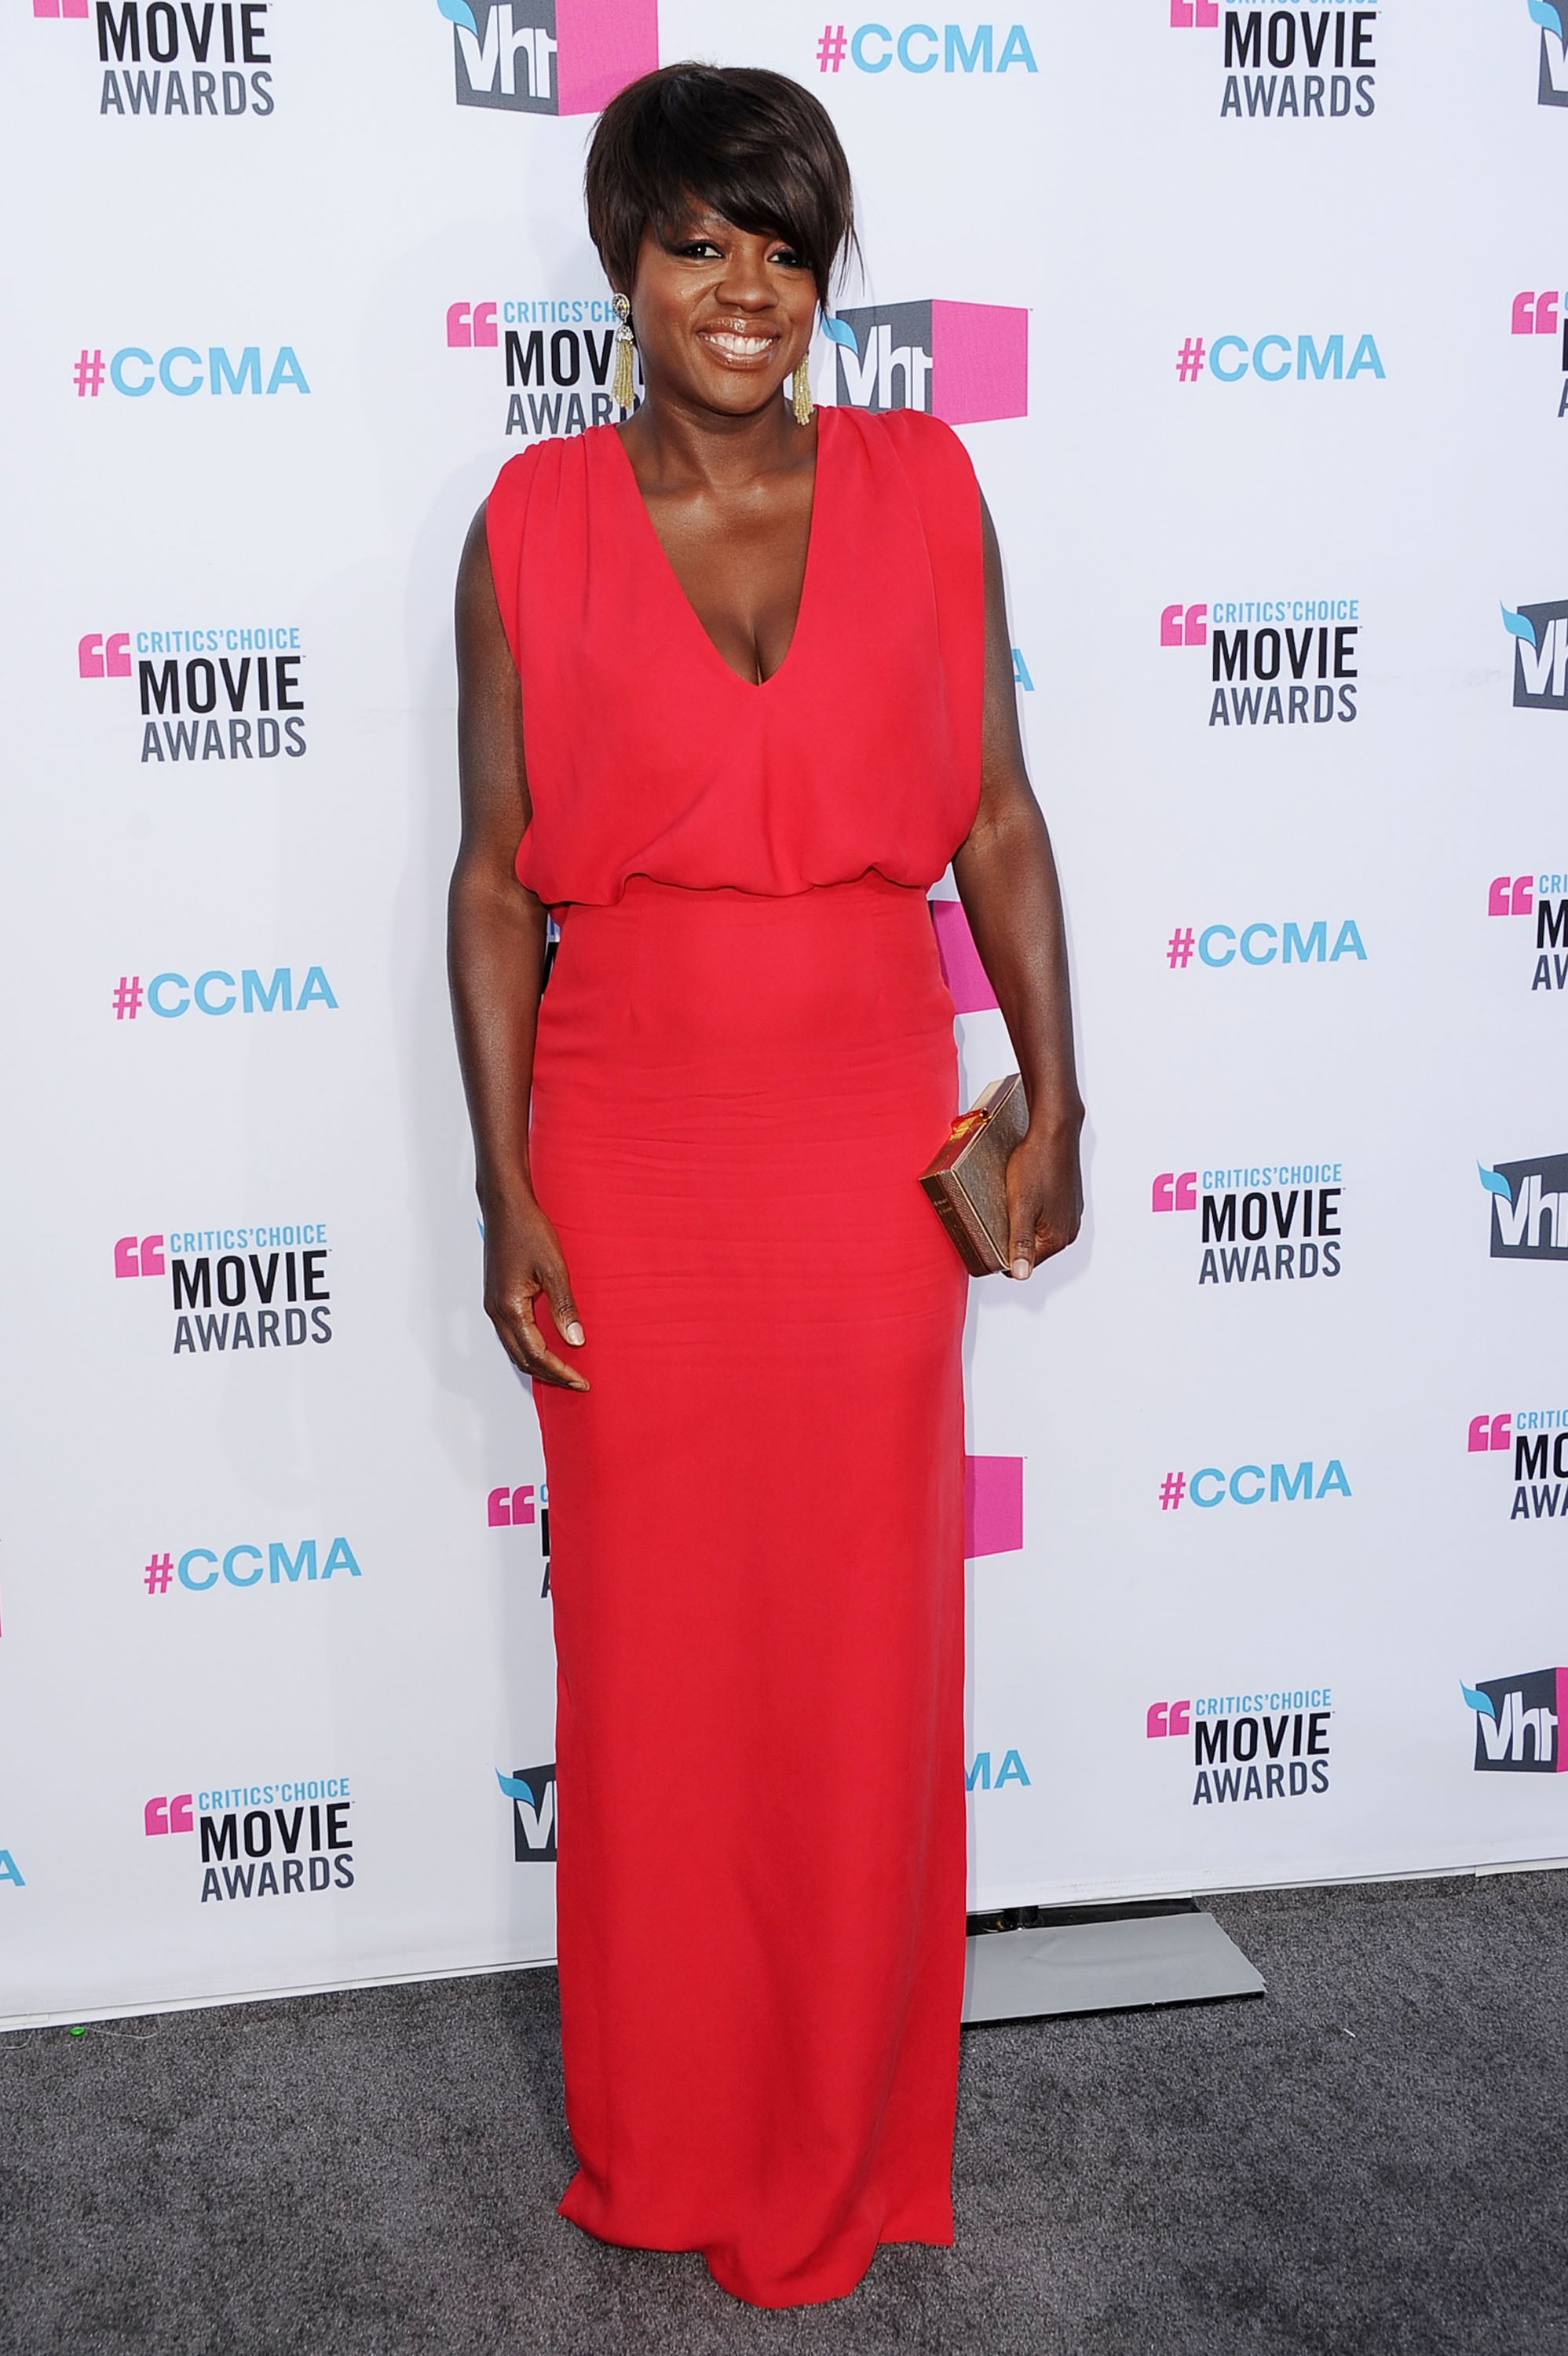 Viola Davis was in red at the 2012 Critics' Choice Movie Awards.